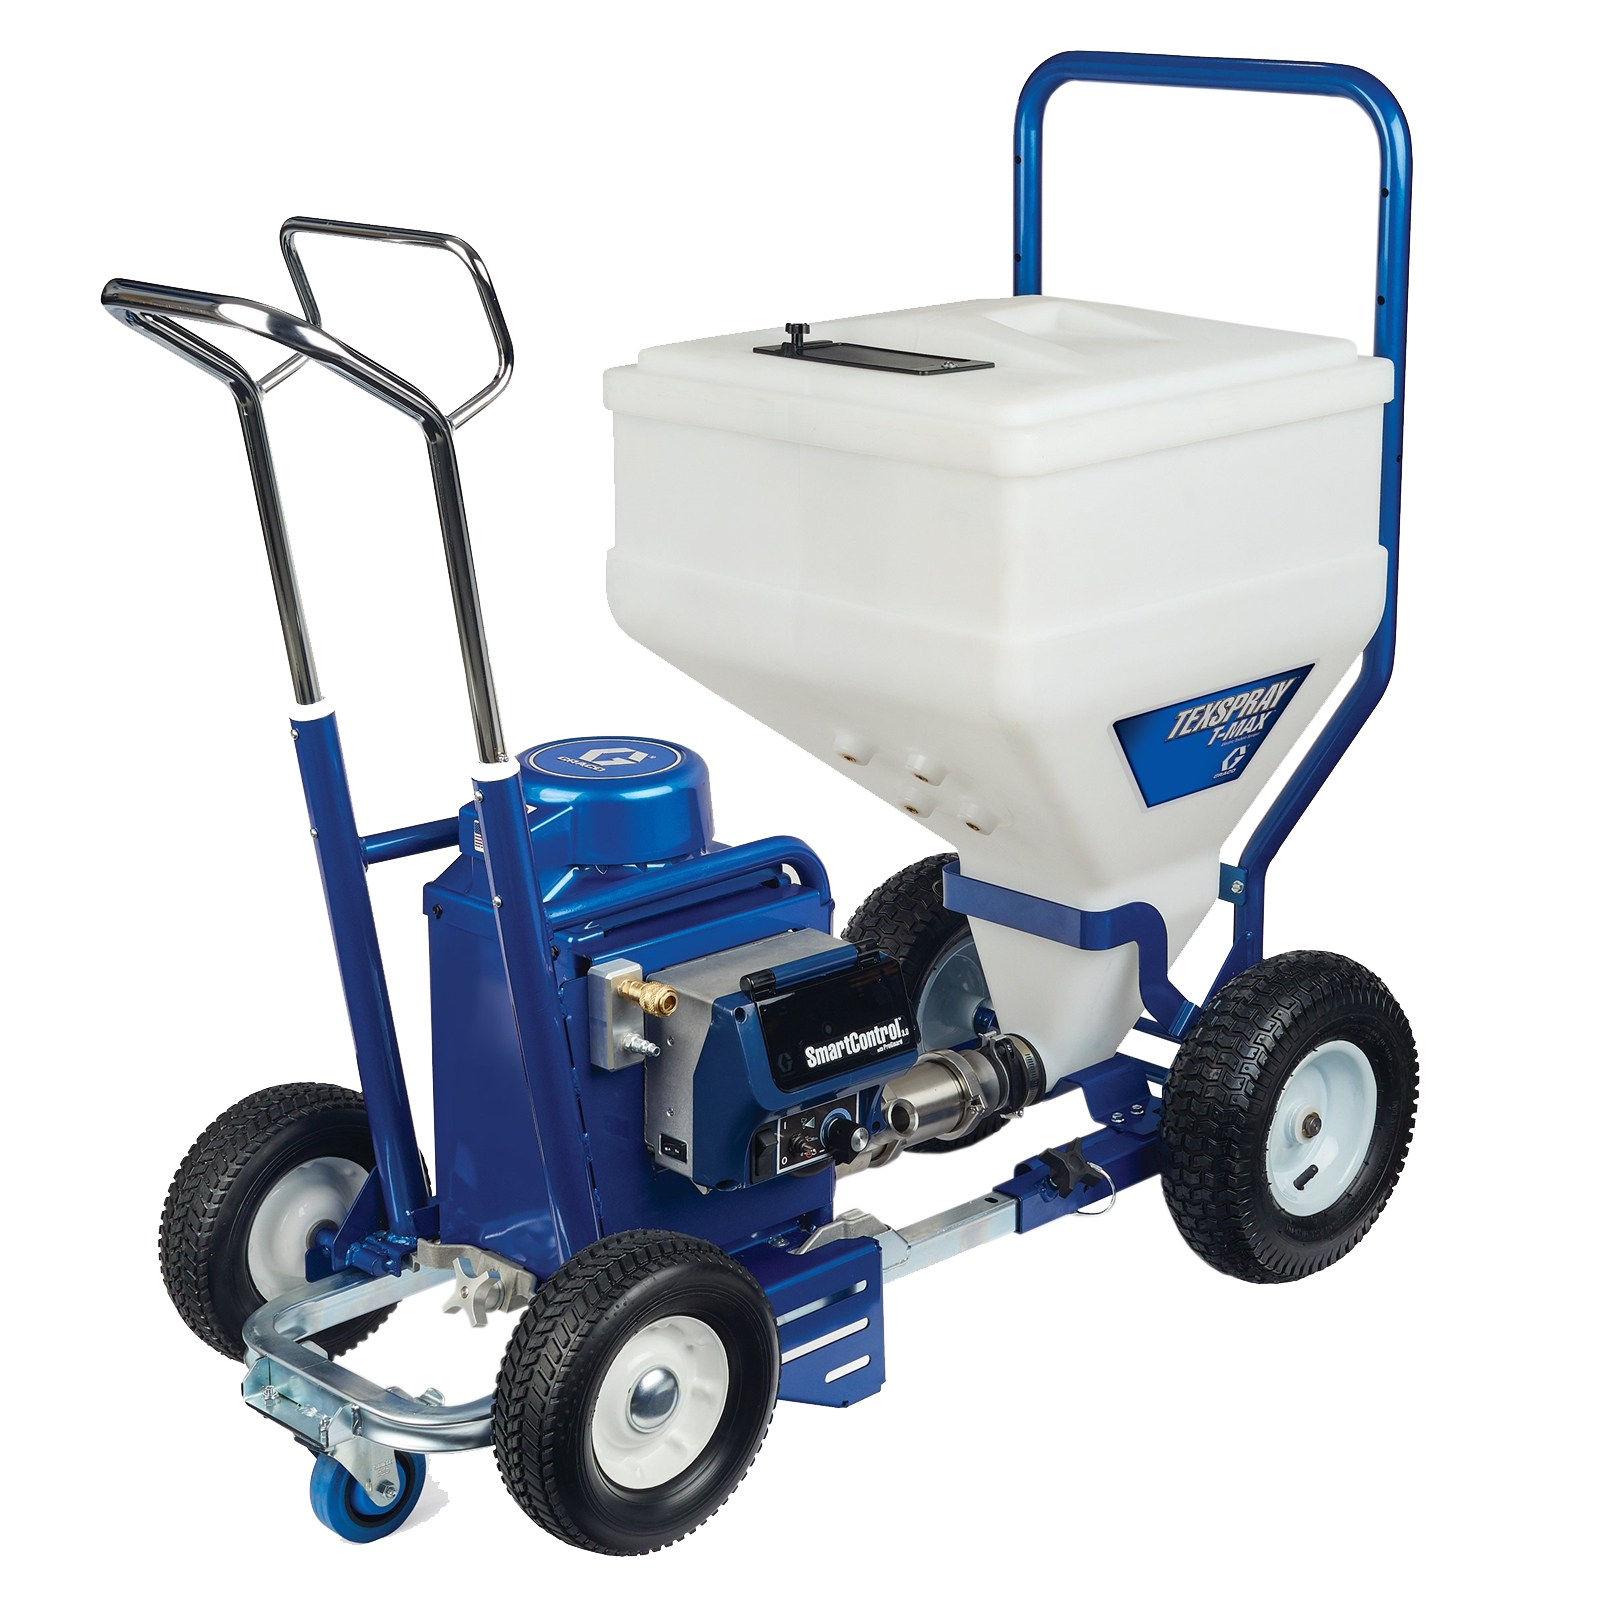 Pompa de glet Airless si Air-assisted - Graco T-Max, 506, 657, 6912